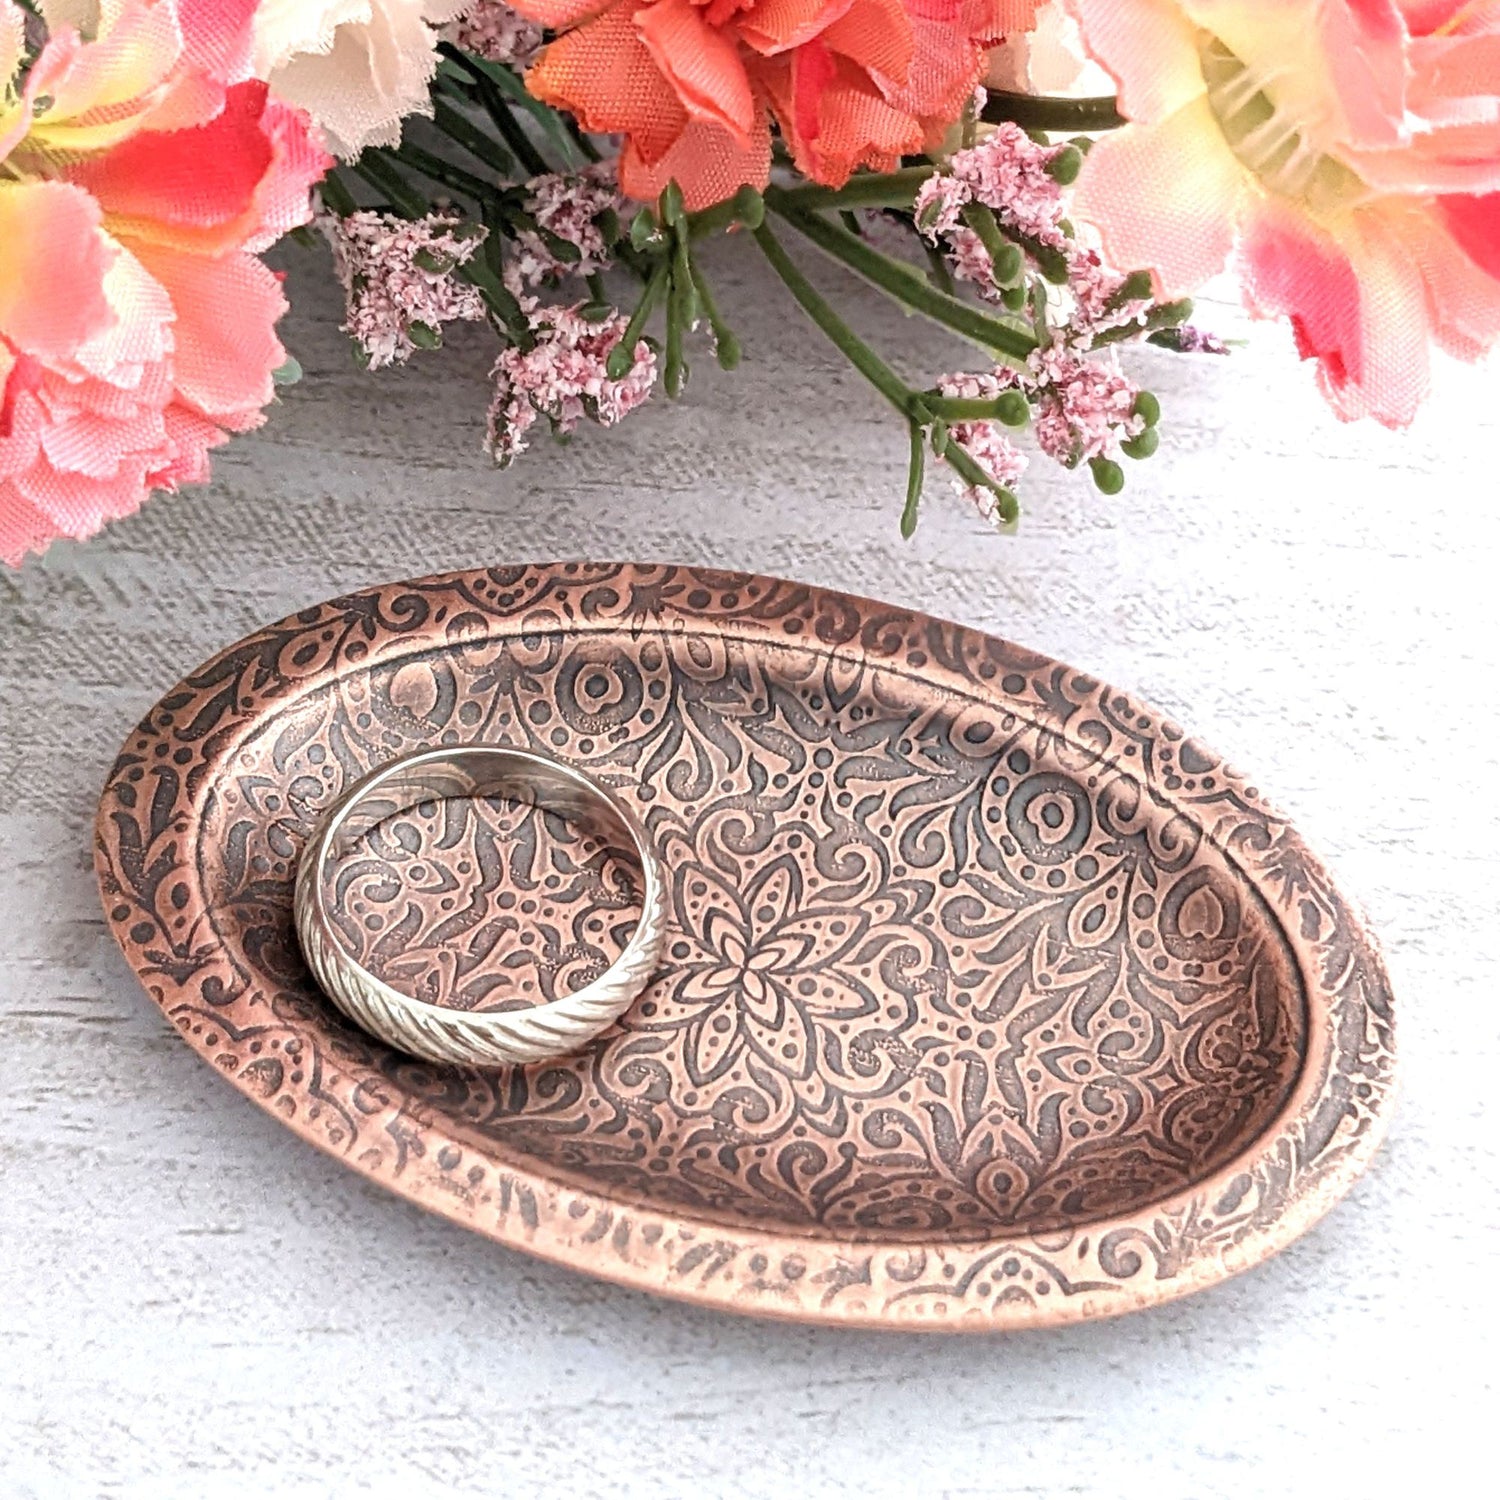 Copper oval ring dish with abstract garden flowers and leaves design.  Dish is 2 inches by three inches with a raised lip. displayed with flowers in background